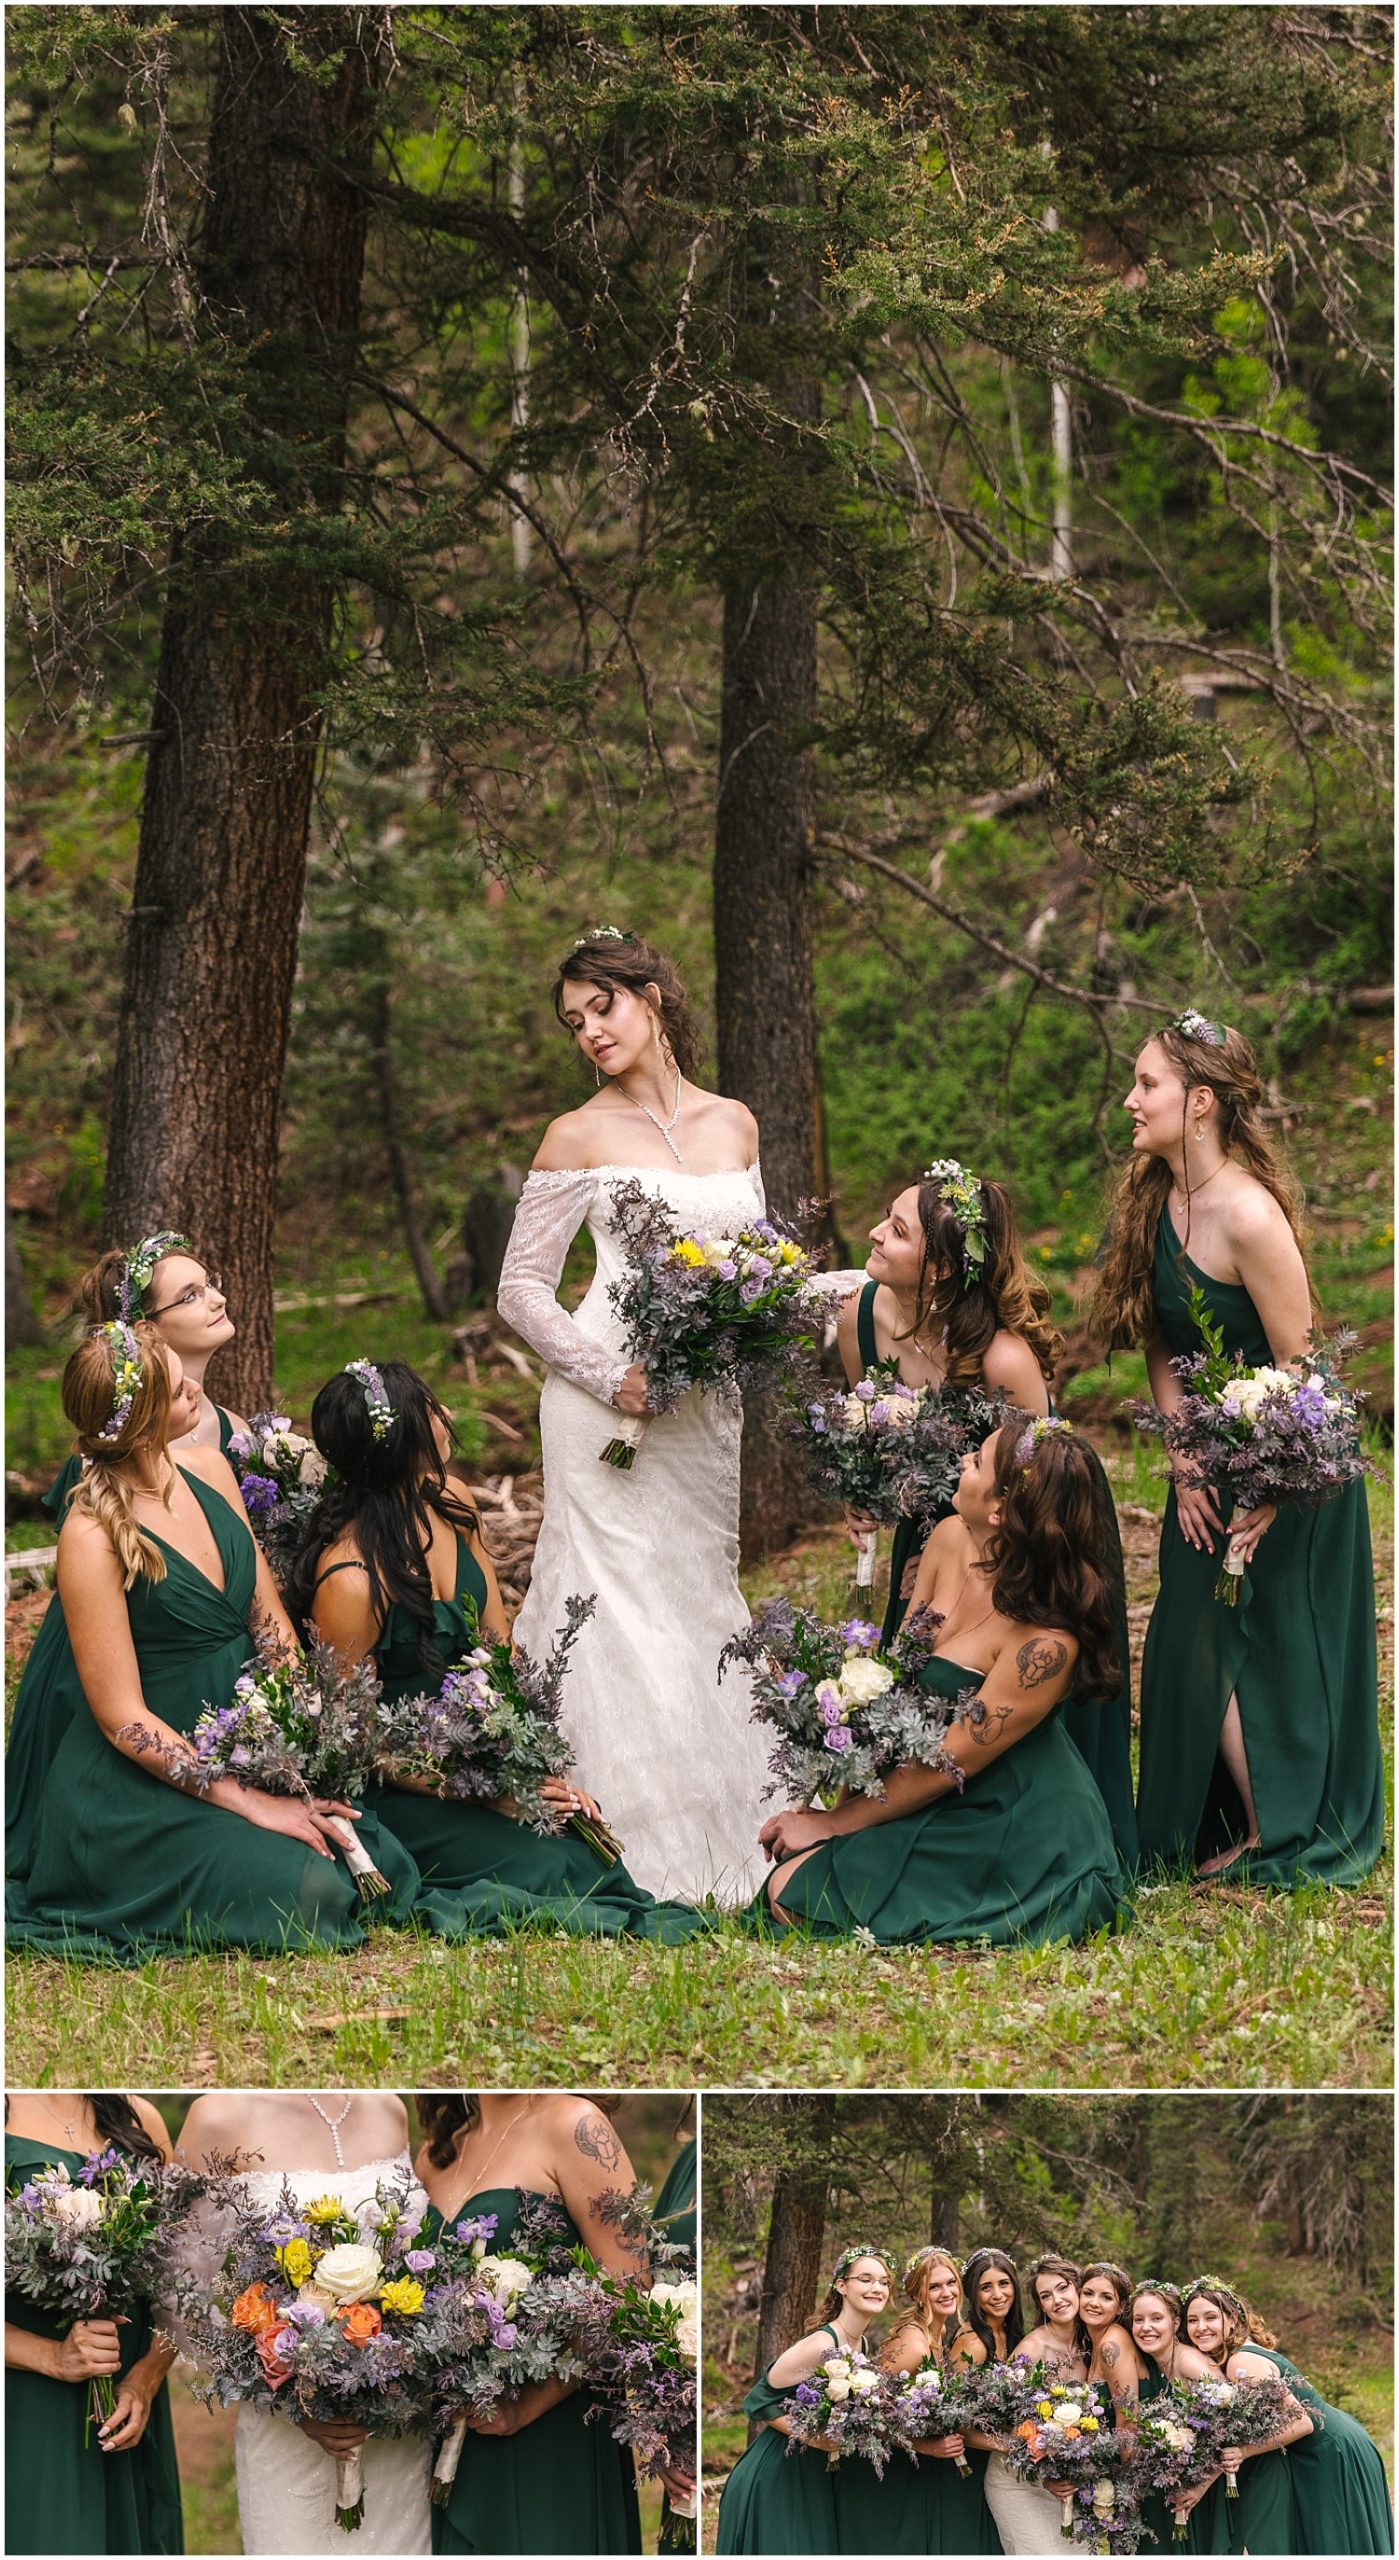 Bridesmaids in forest green dresses fawn over bride like a Greek goddess portrait